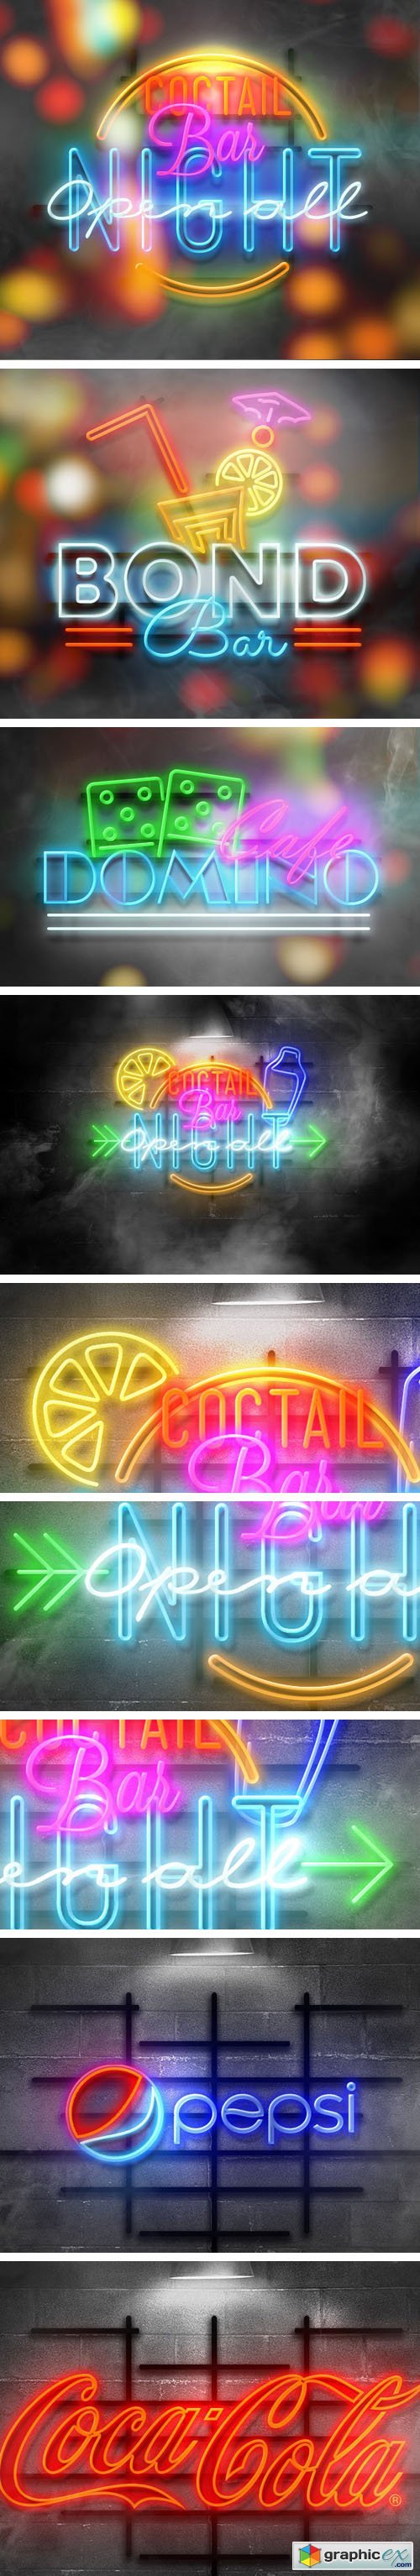 Neon Text PSD Mockup Template